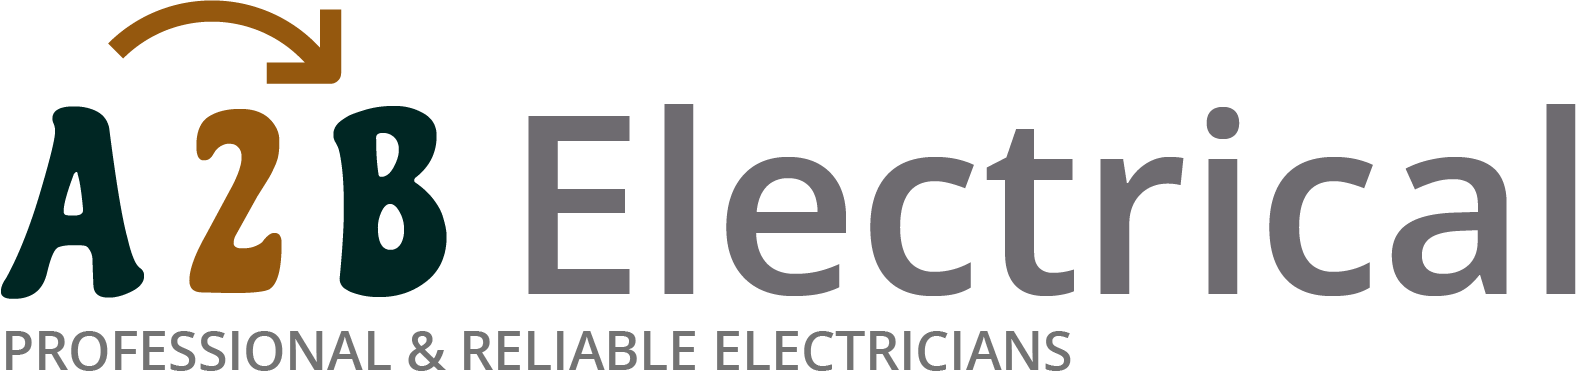 If you have electrical wiring problems in Wrythe, we can provide an electrician to have a look for you. 